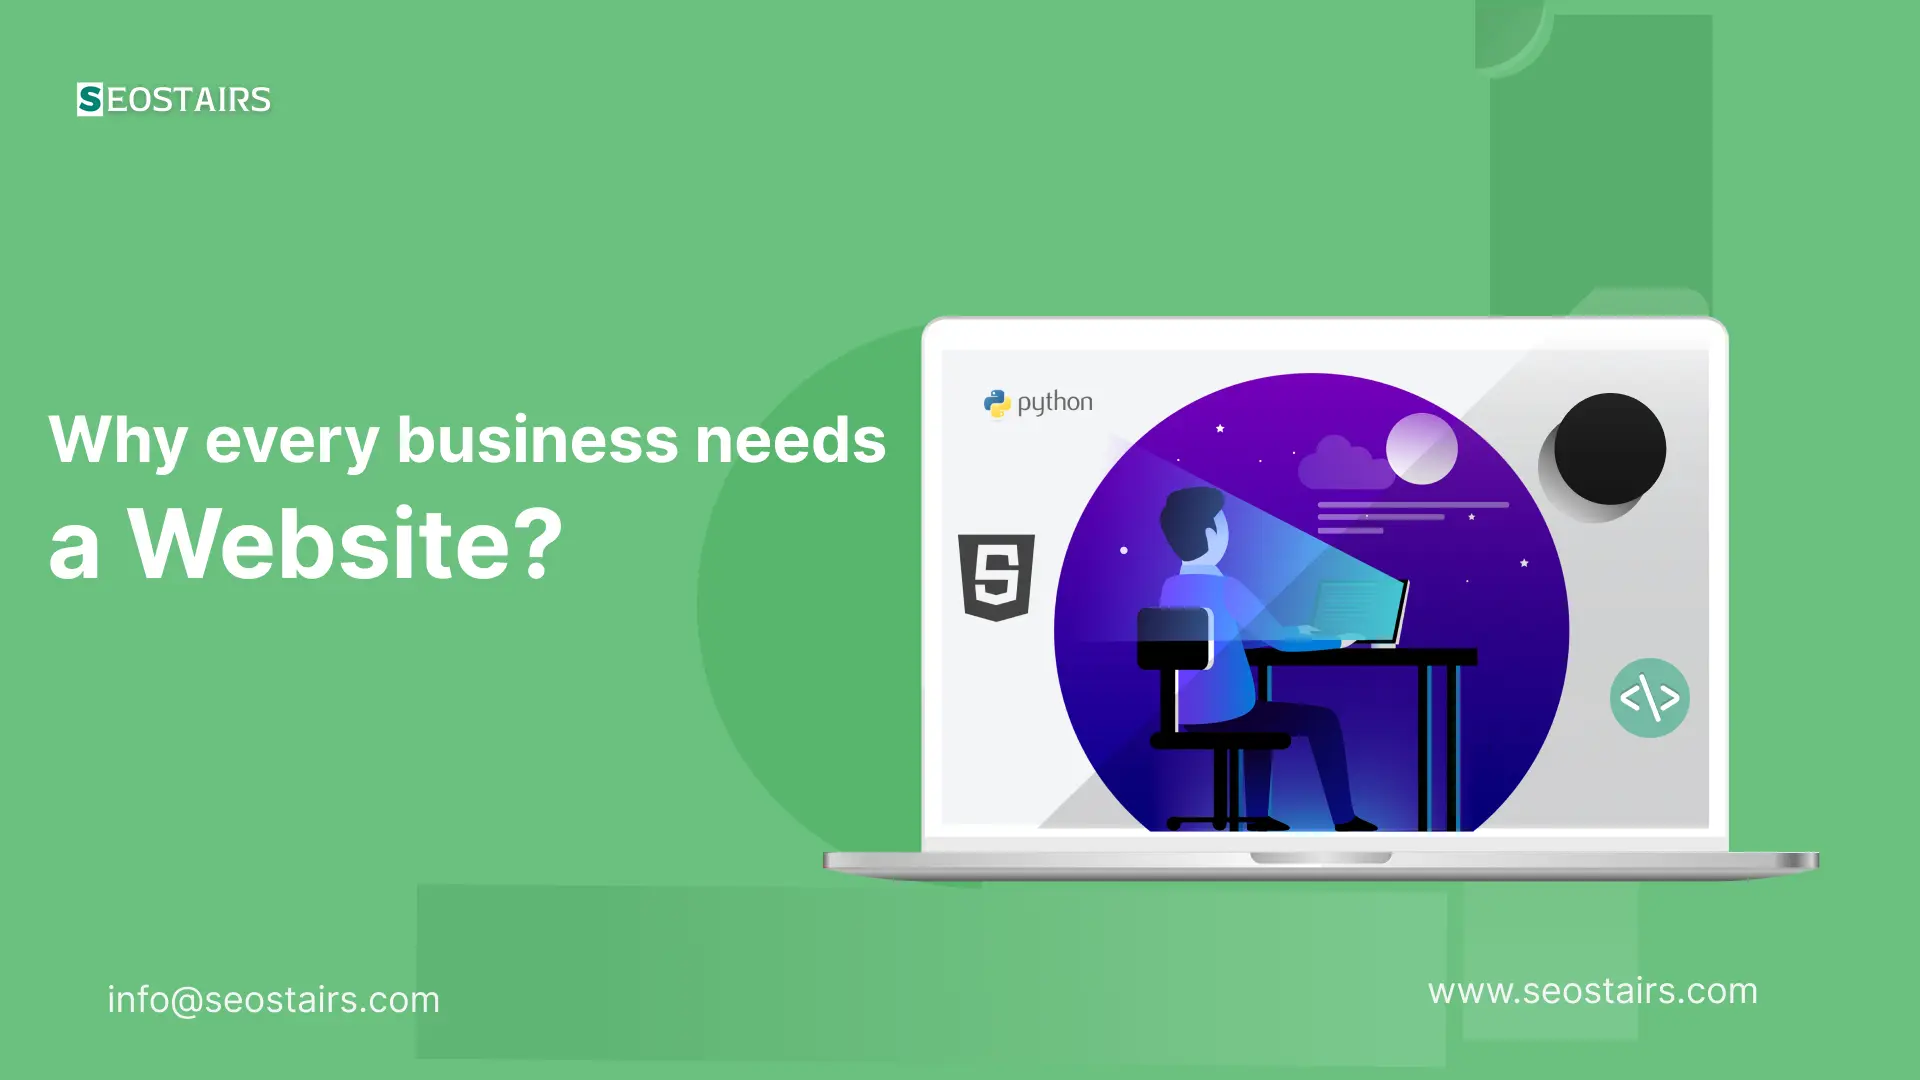 Why Does Every Business Need a Website?